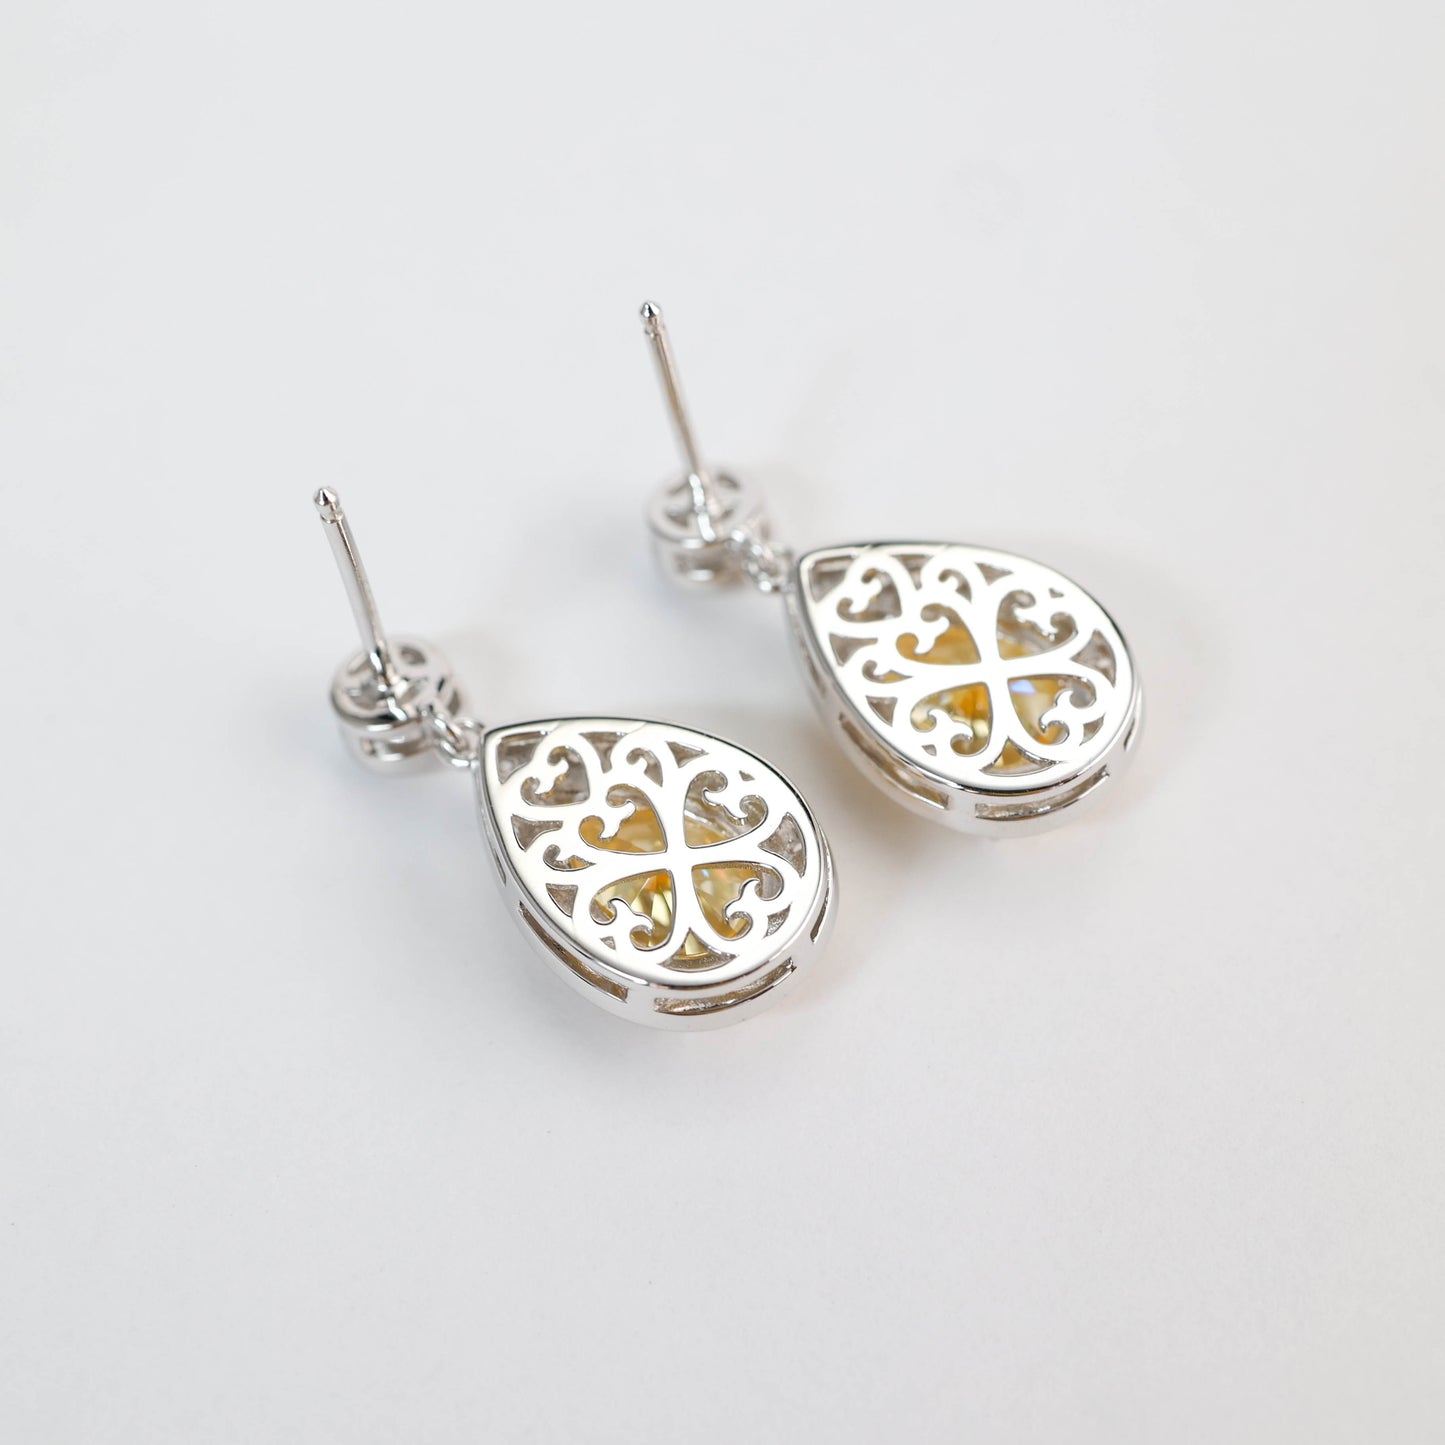 Promotional design Micro-setting Yellow diamond color Lab created stones waterdrop earrings, sterling silver.